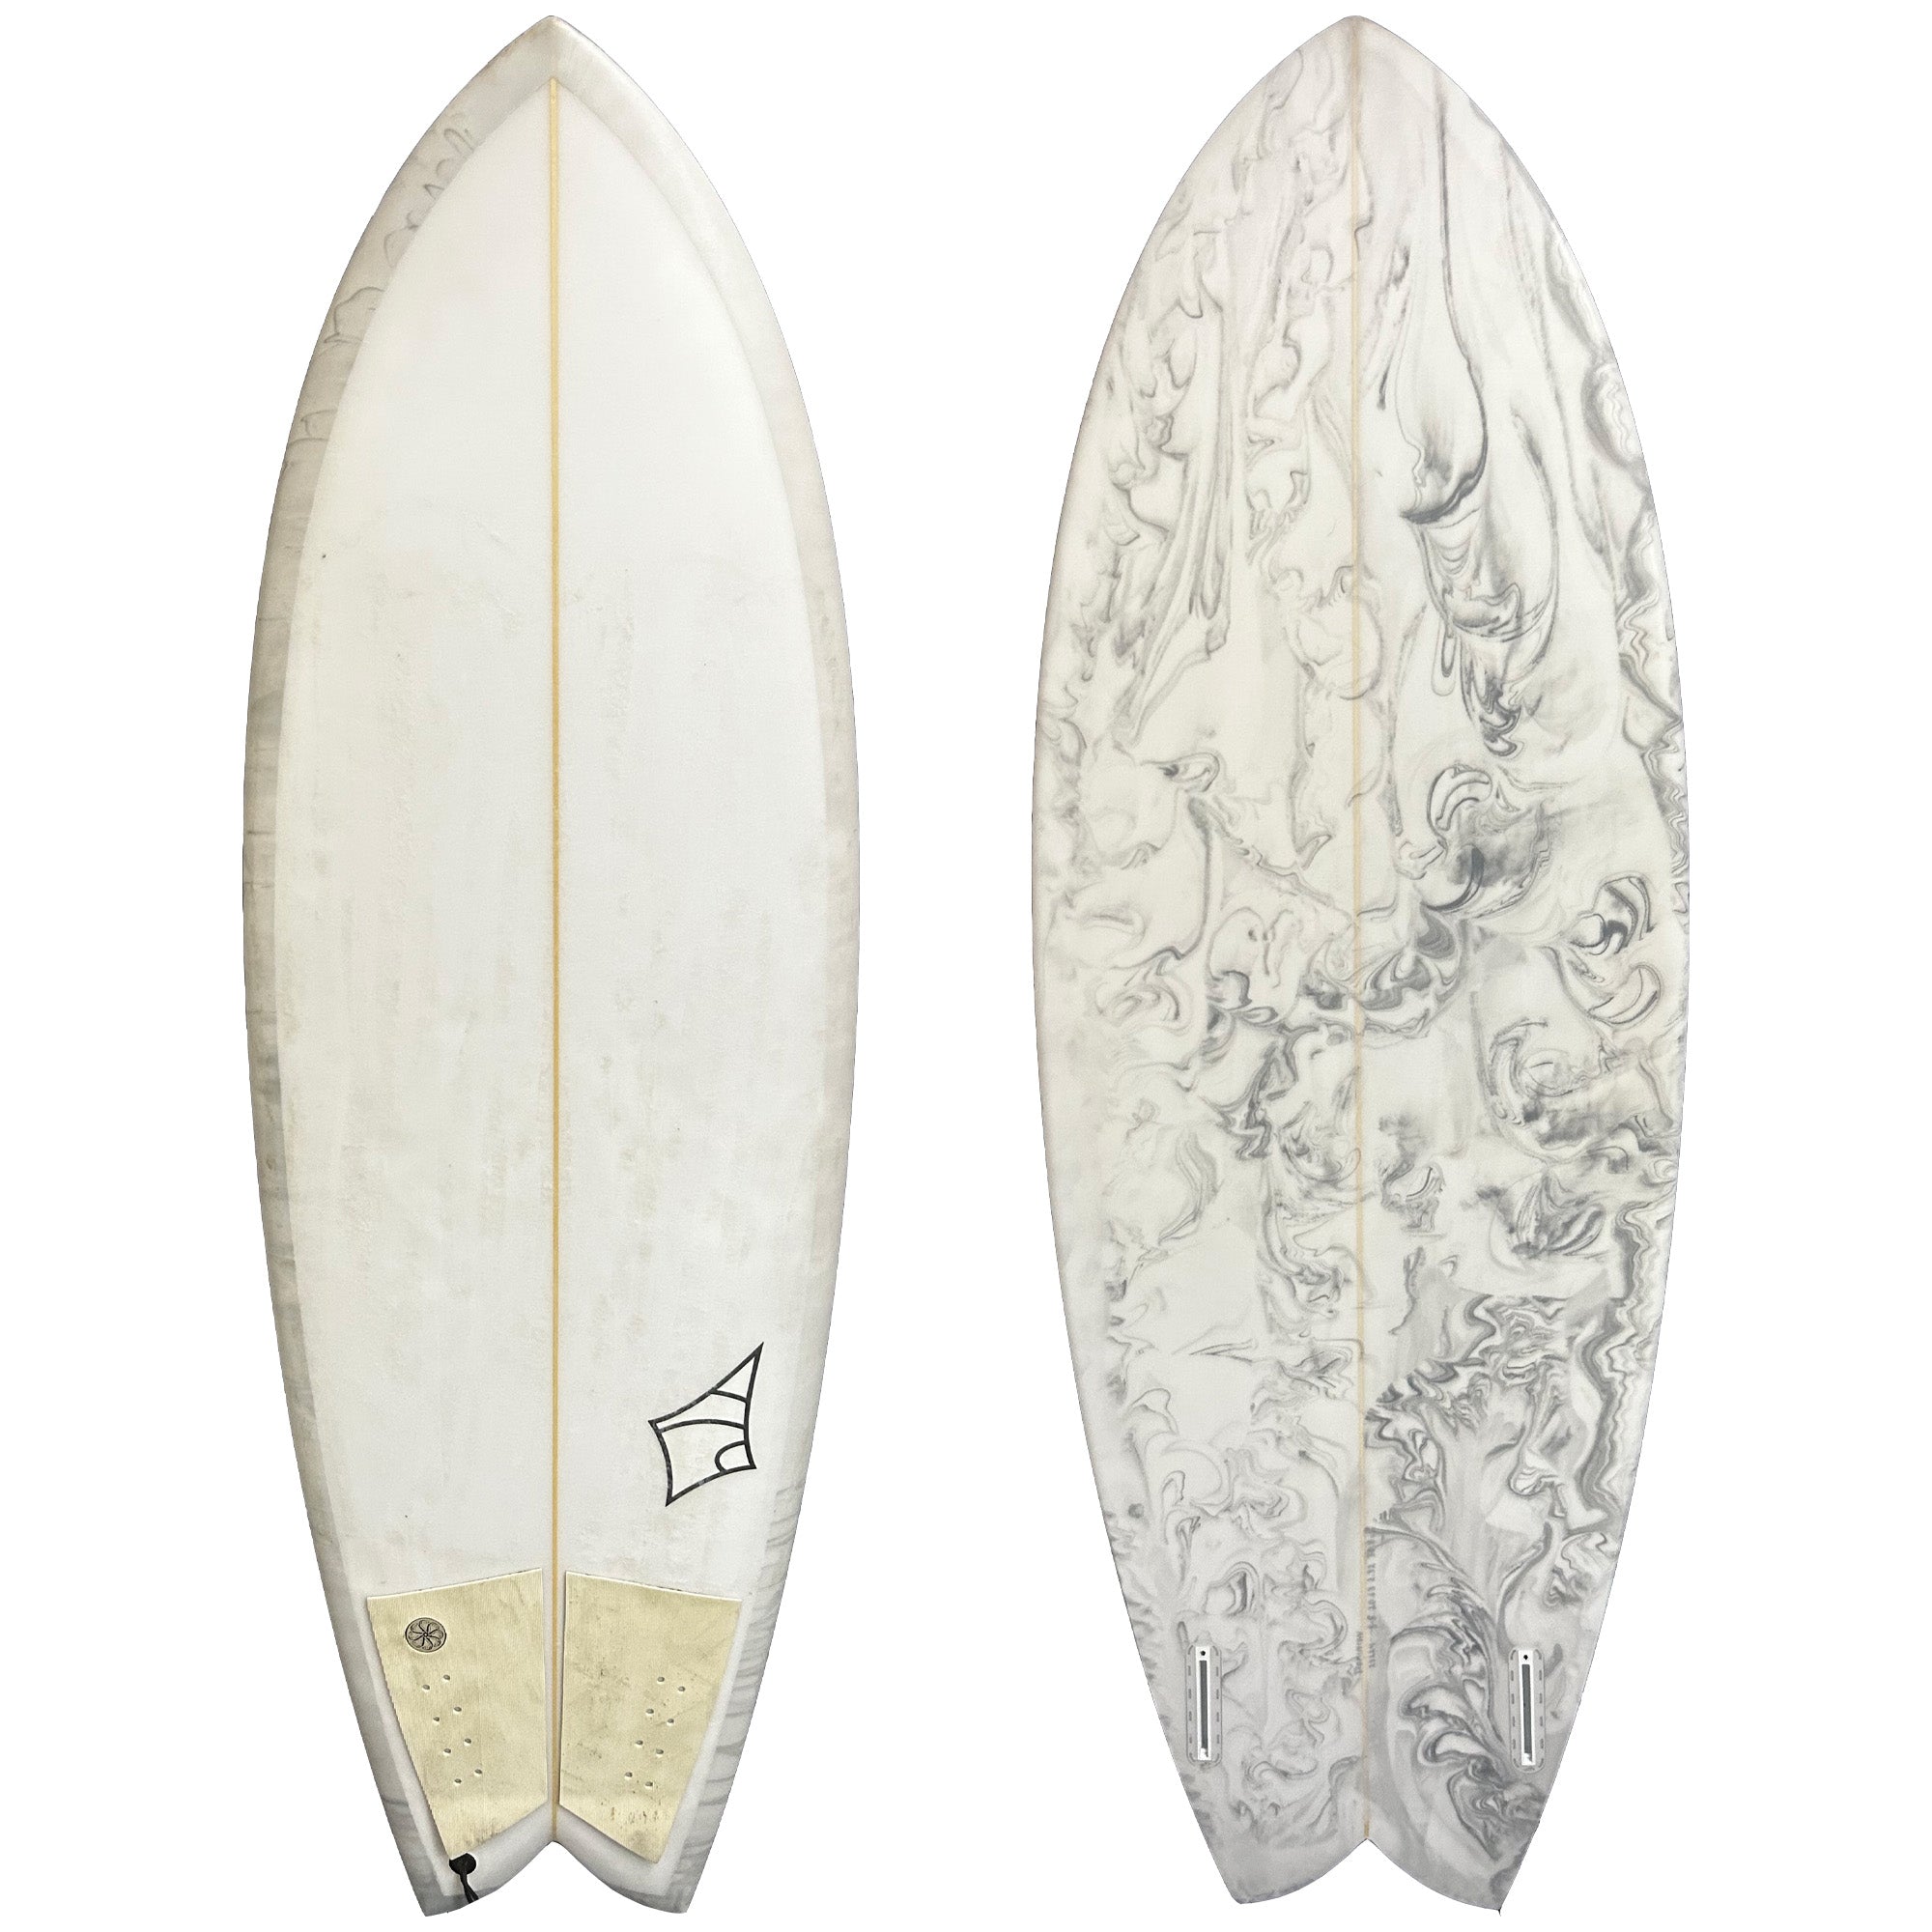 Dominion 5'5 Consignment Surfboard